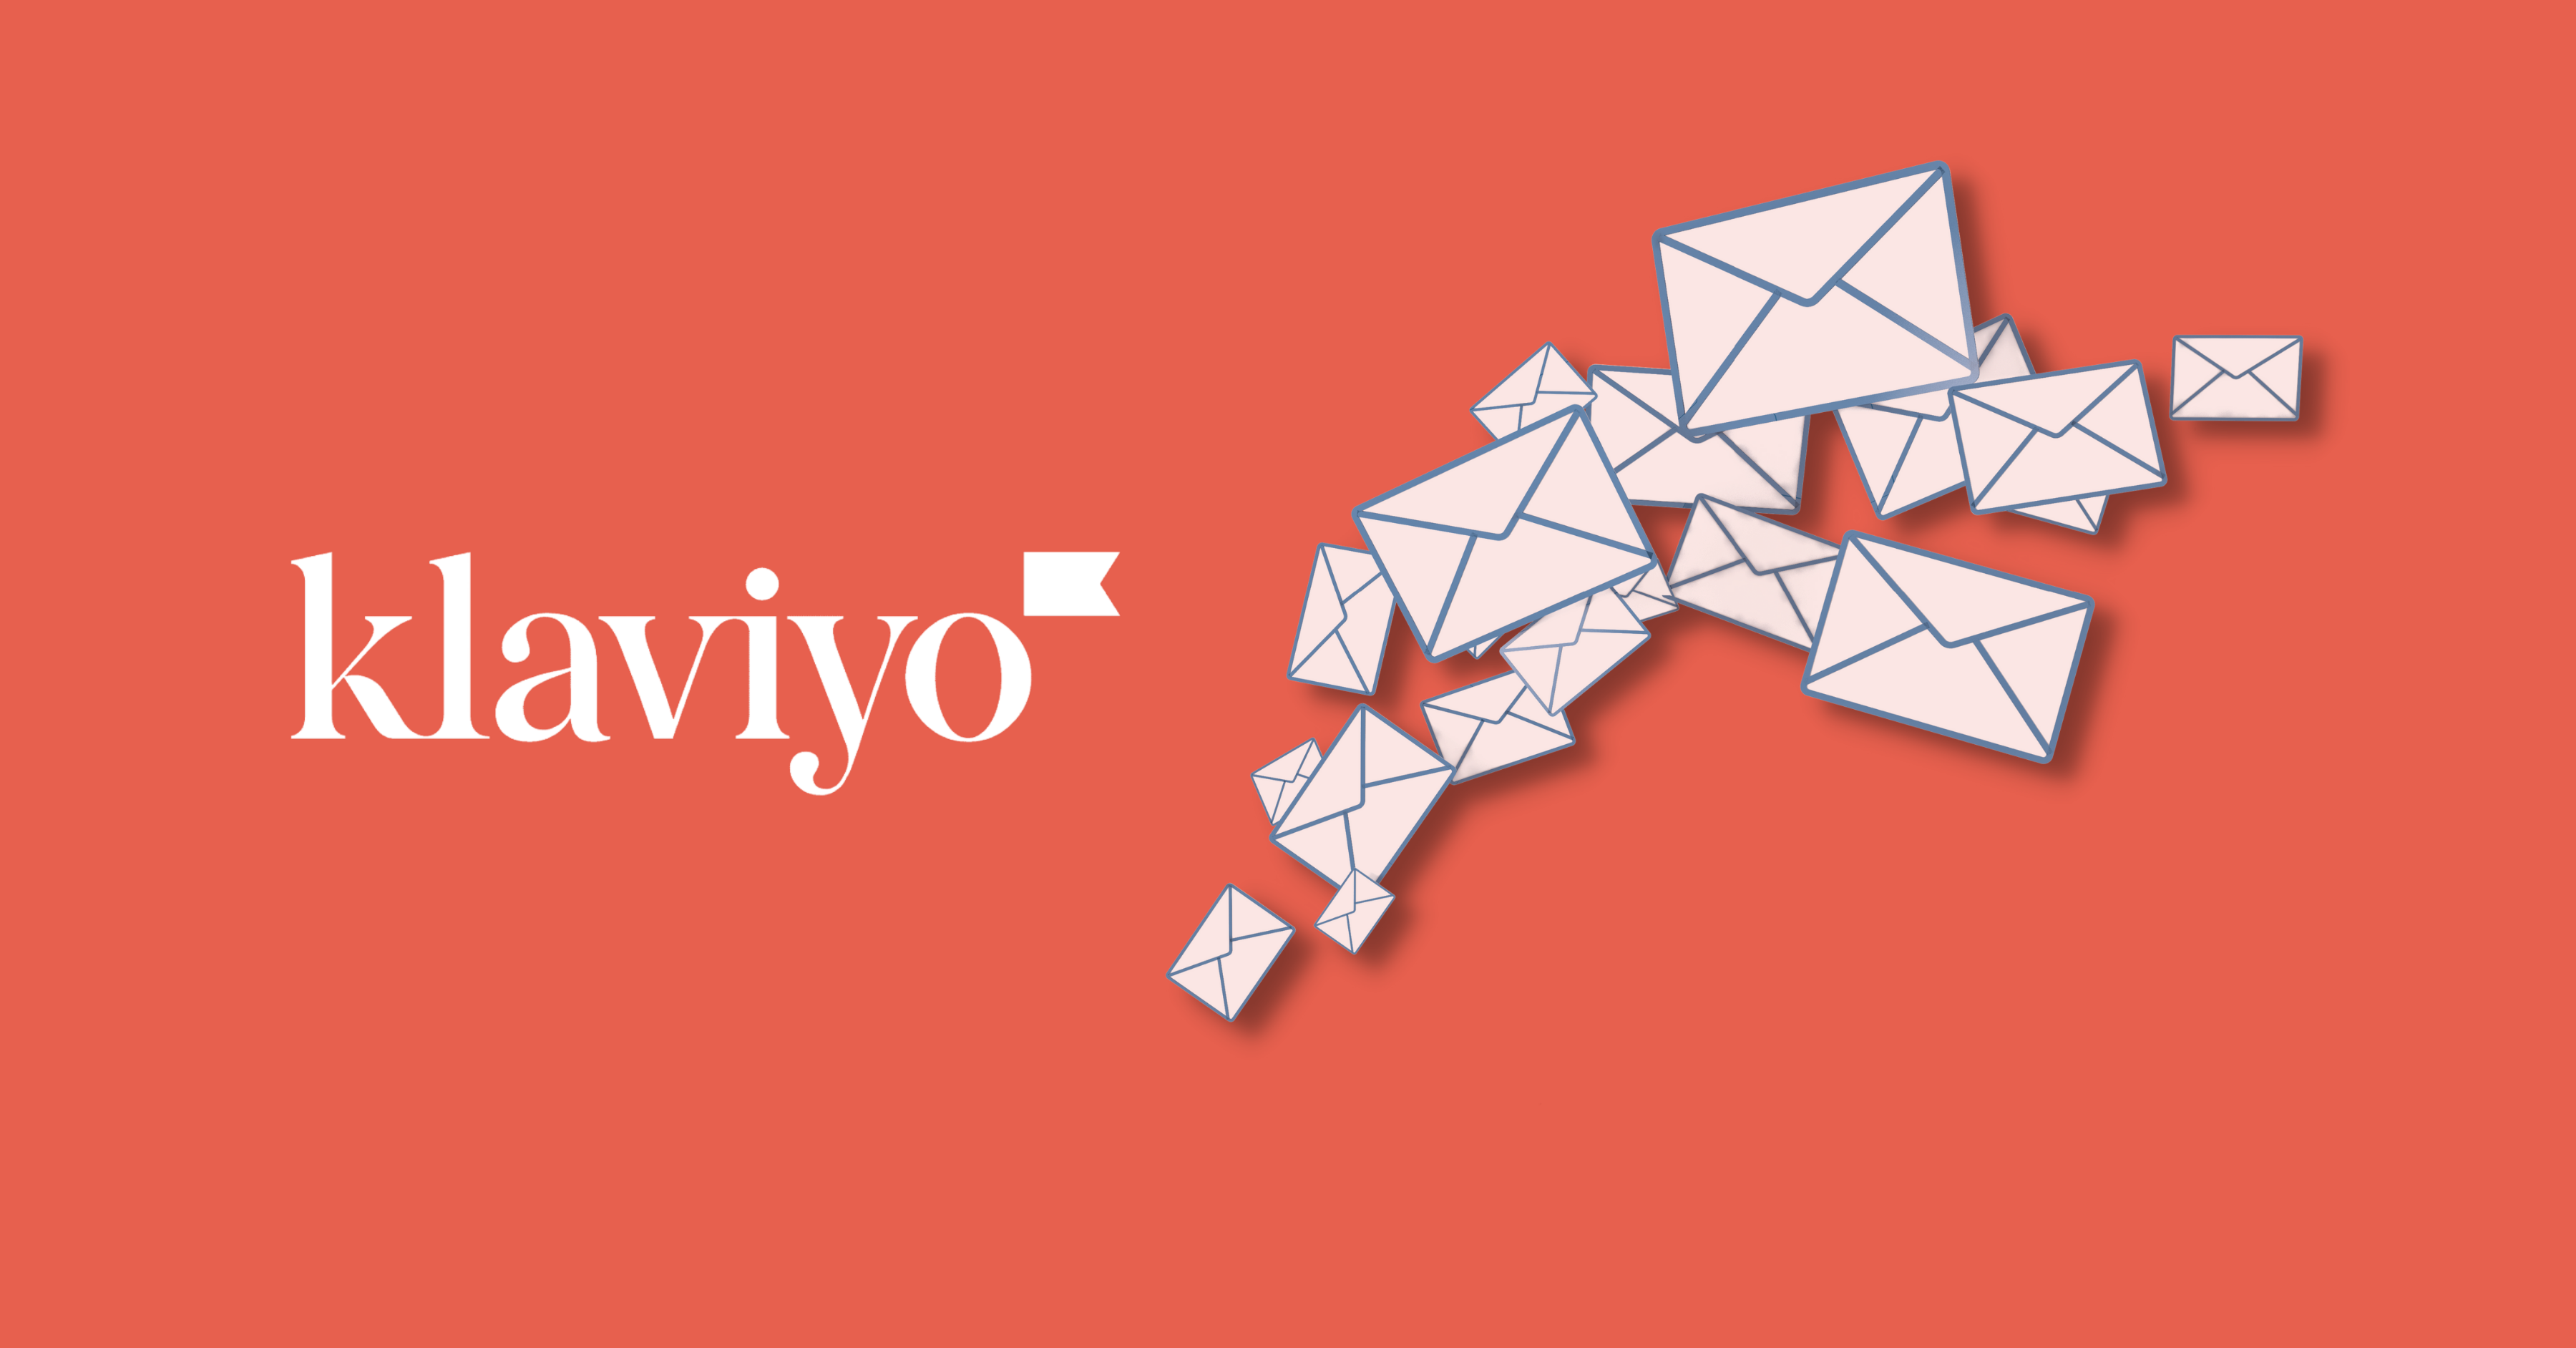 We Increased Email Revenue 126% With Our Signature Klaviyo Jumpstart